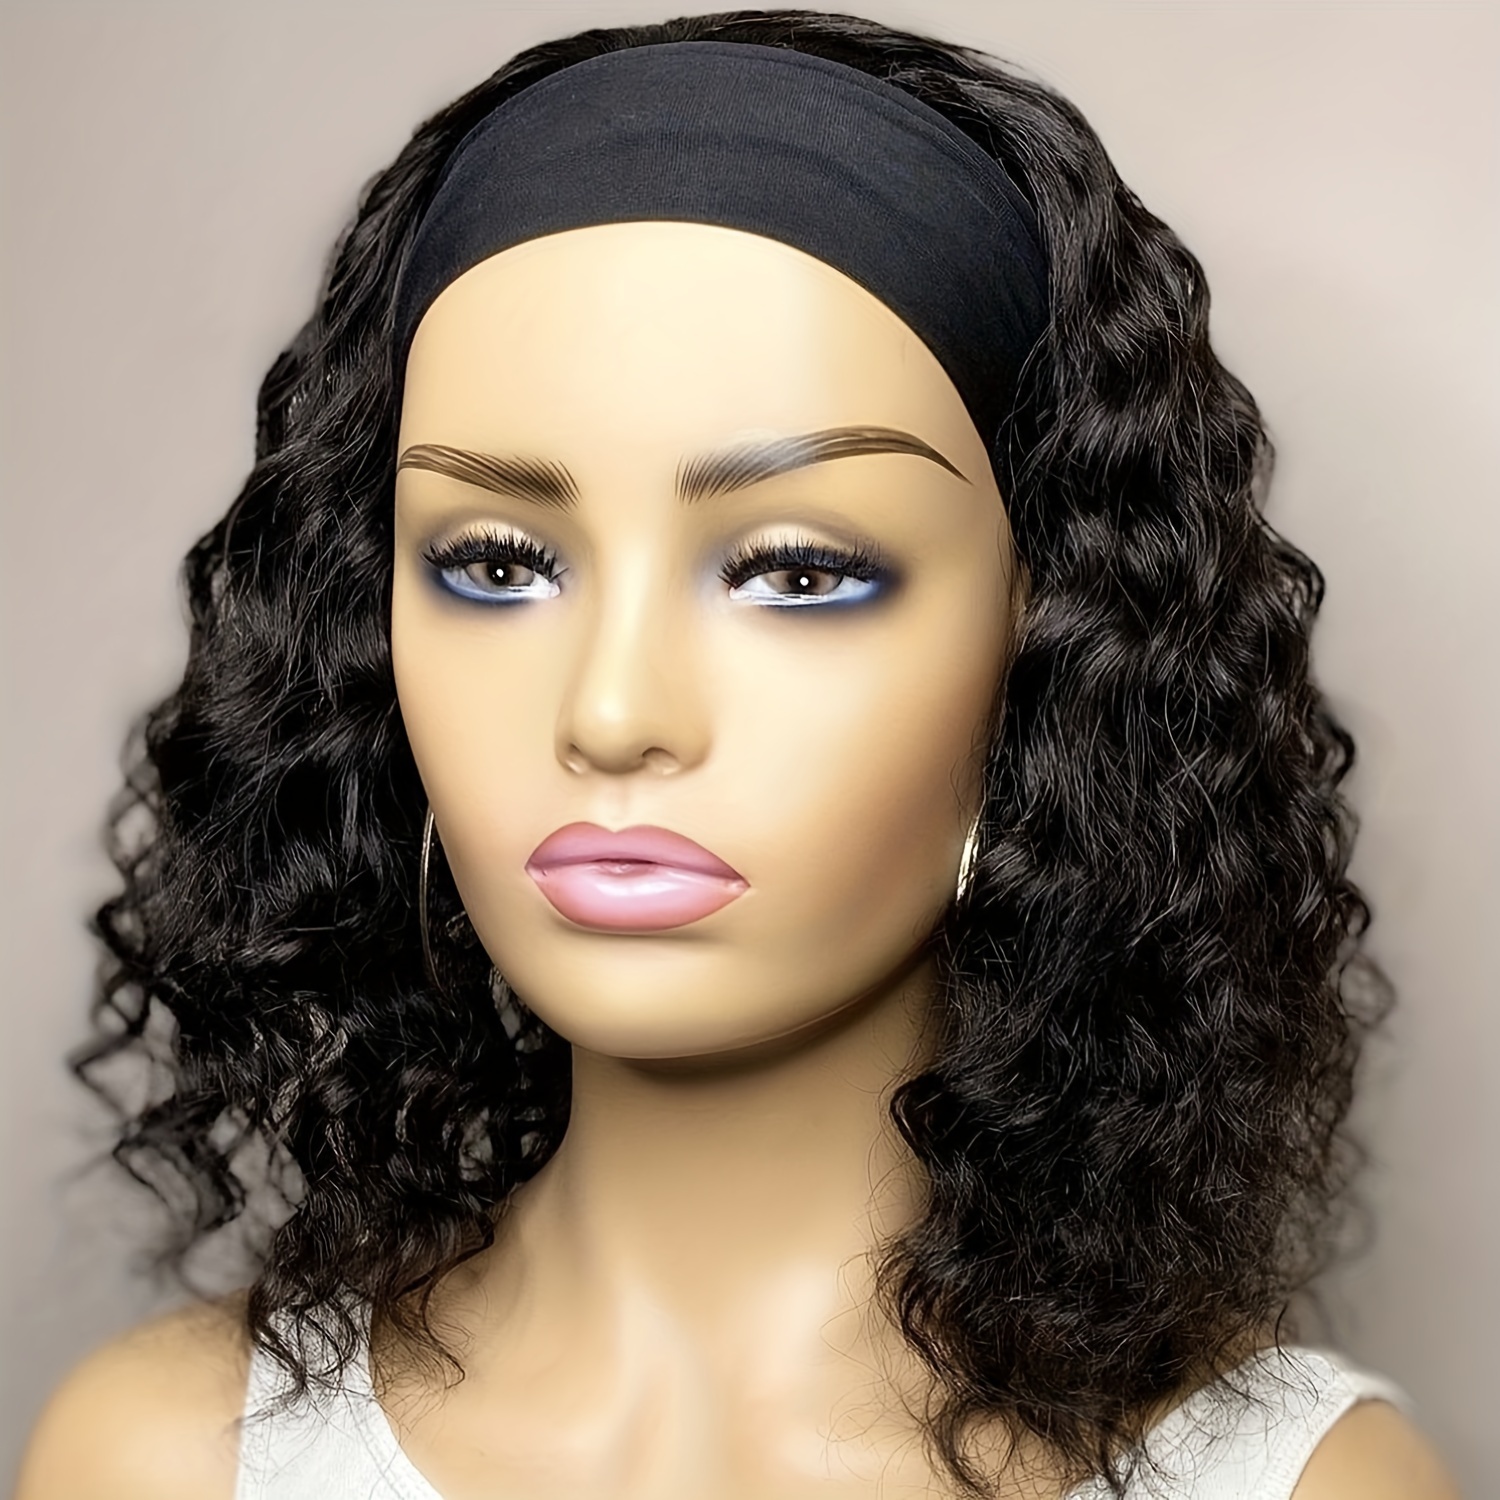 

Short Bob Wigs Water Wave Headband Wig 100% Human Hair For Women Glueless None Lace Front Wig Machine Made 150% Density Headband Wig With Headbands Deep Curly For Daily Use Natural Color